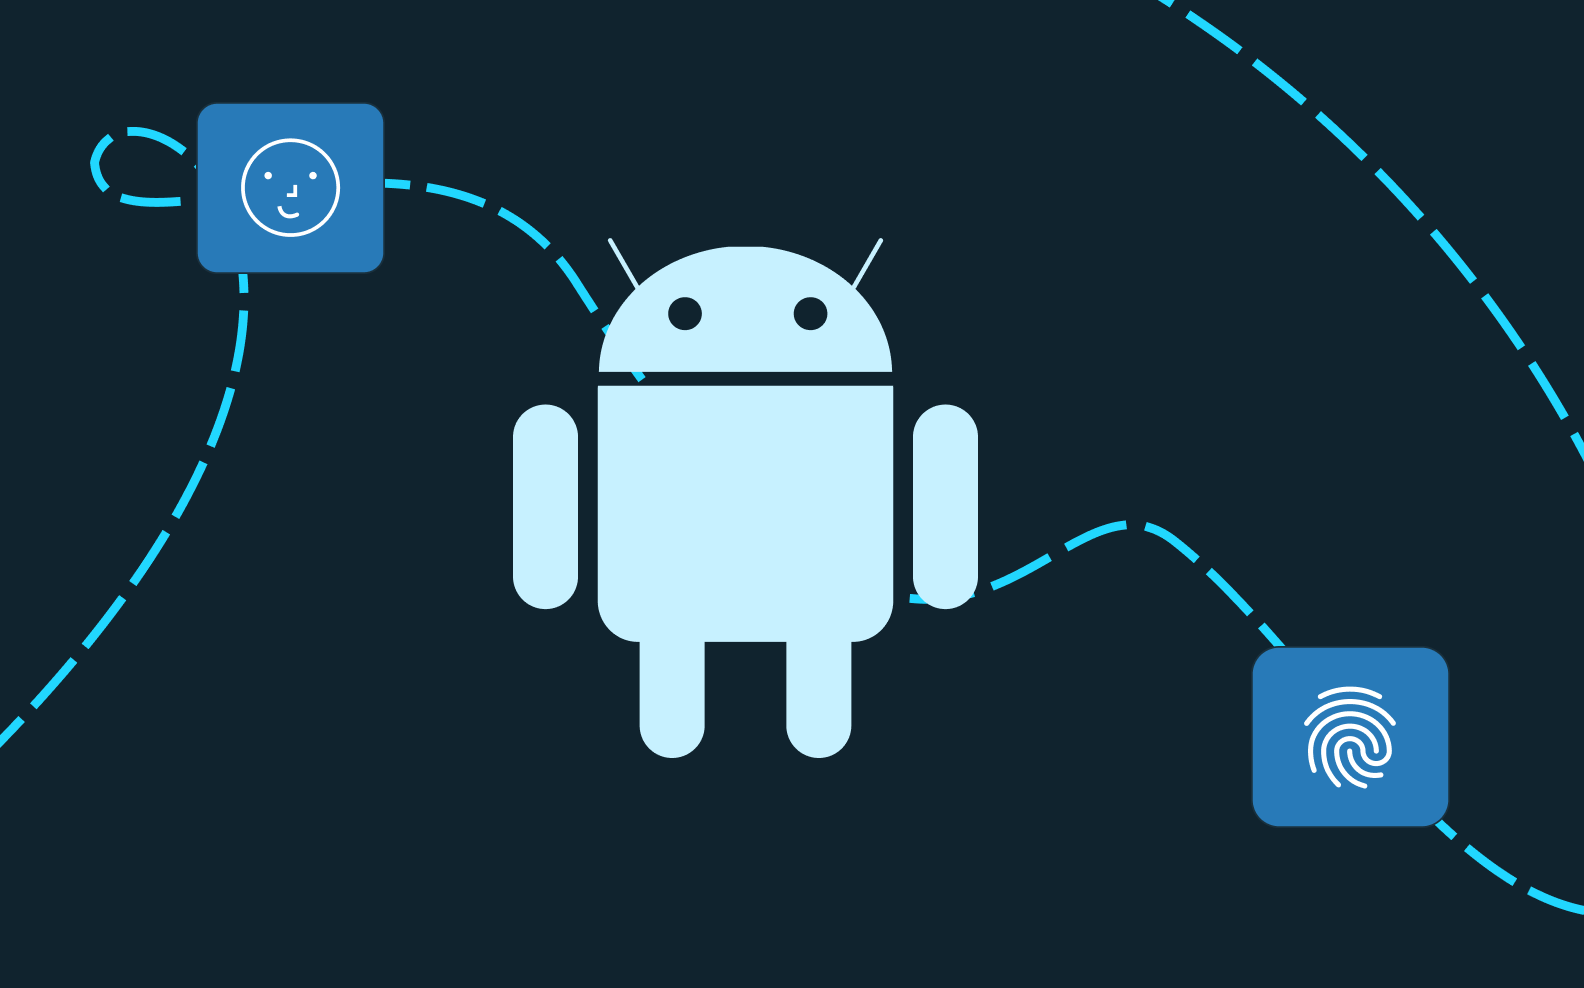 An engineer's guide to mobile biometrics: Android Keystore pitfalls and best practices